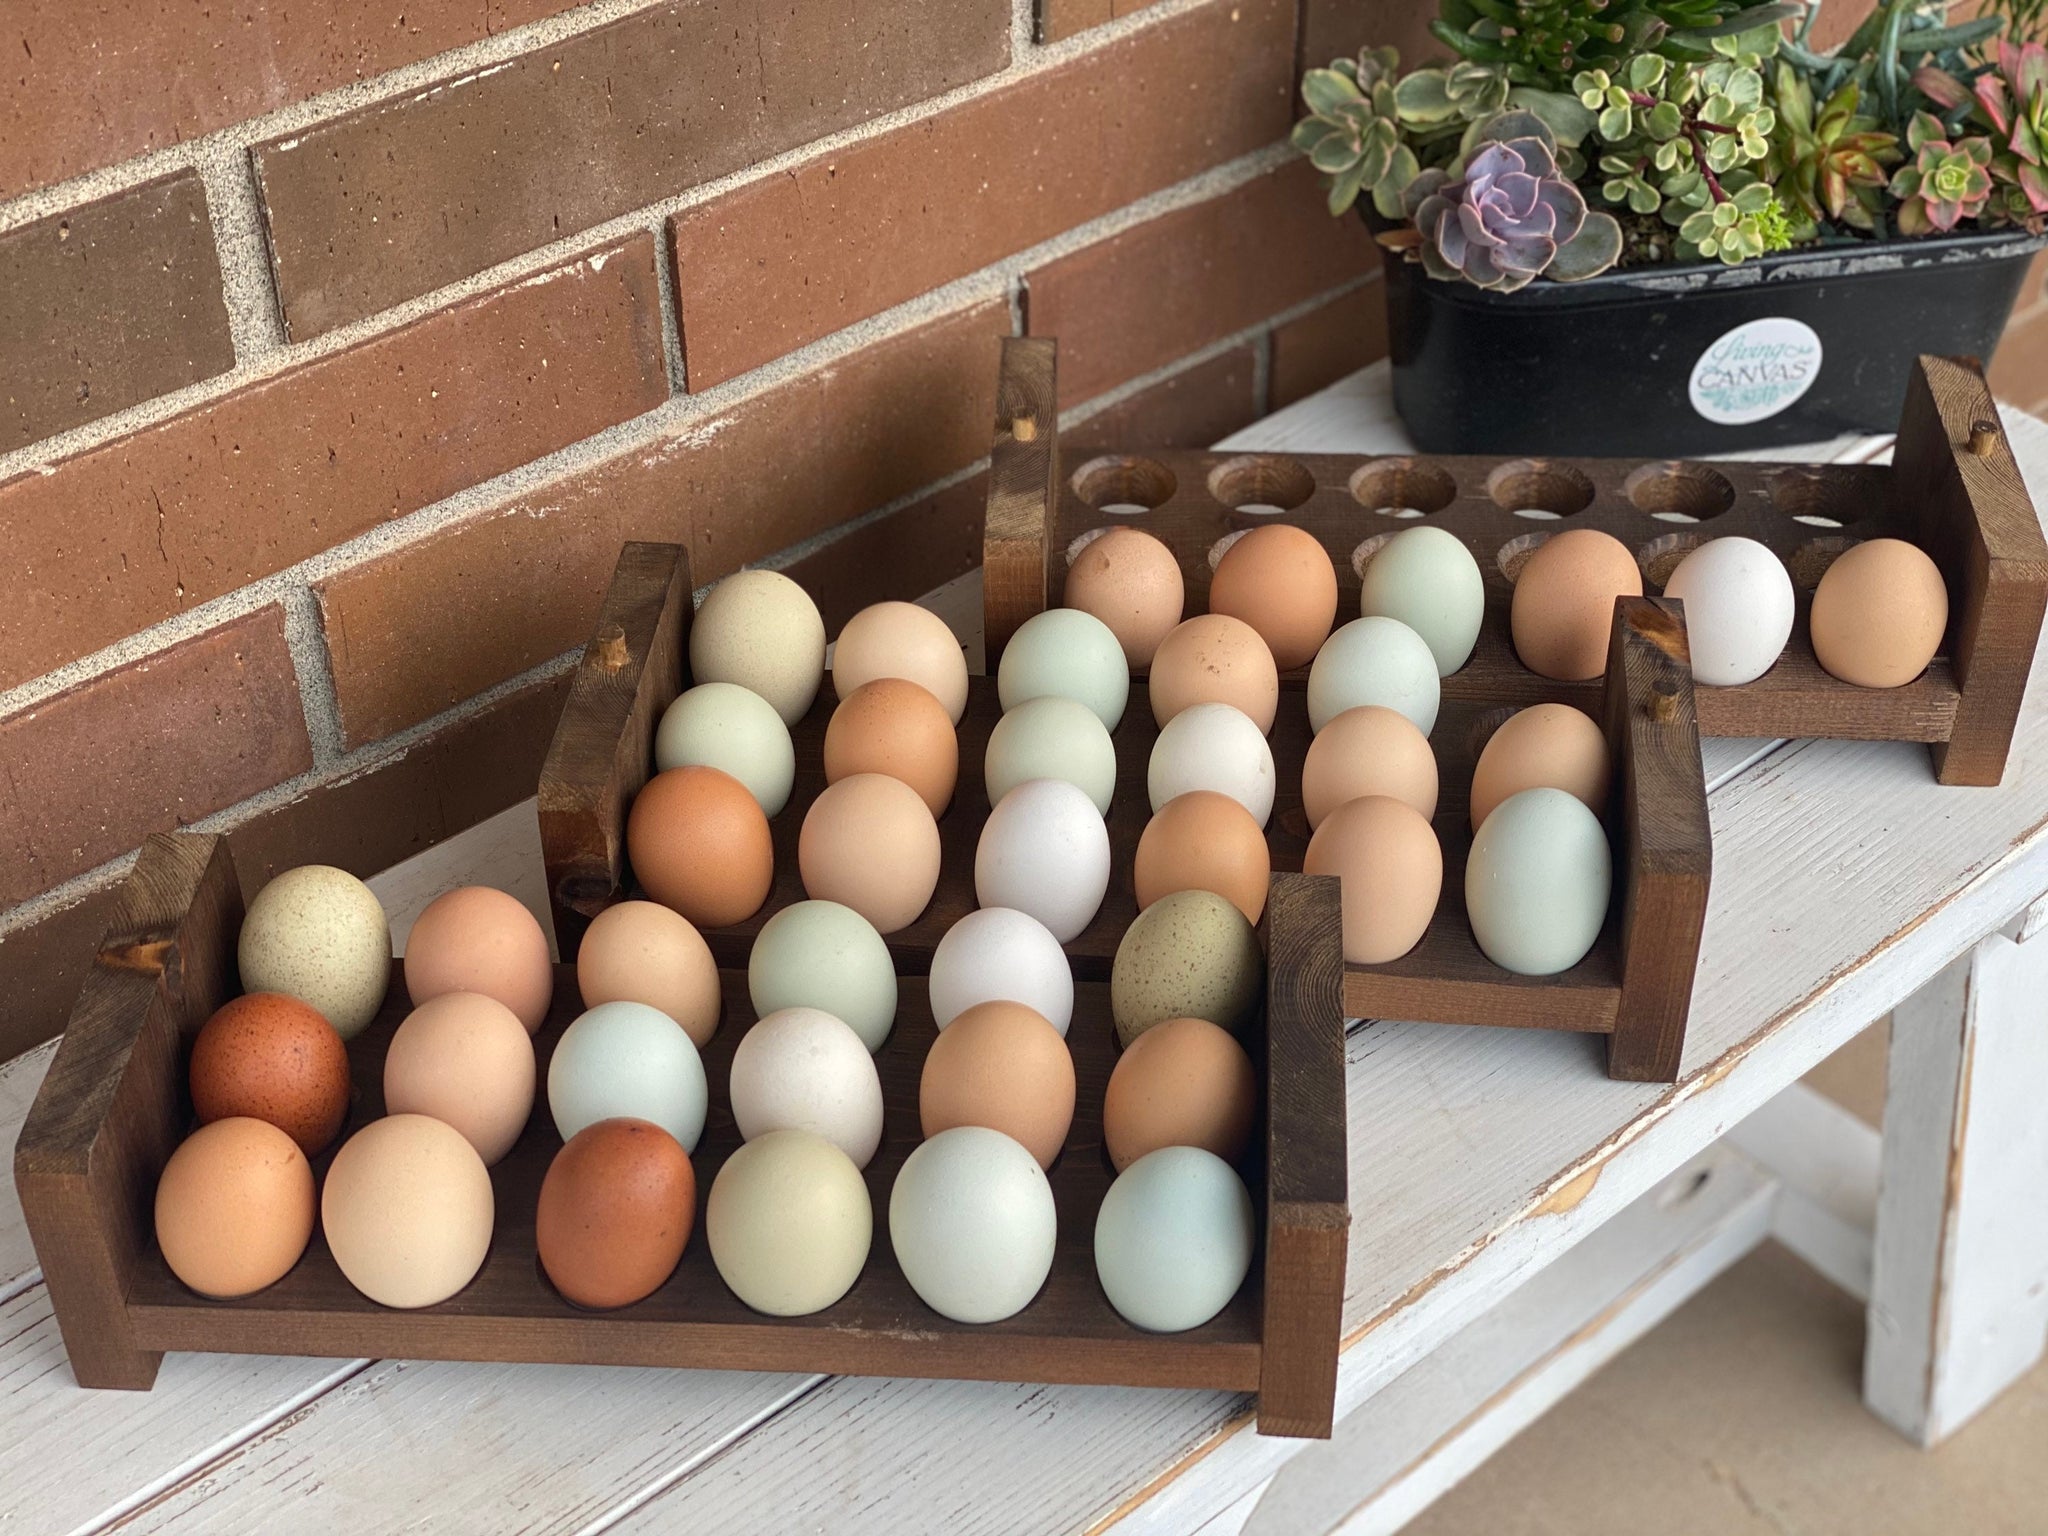 Egg Holder Countertop, Deviled Egg Tray Carrier, Wooden Spice Organizer,  Kitchen Organization with Rustic Farmhouse Decor, Eggs Storage Box with 18  Holes